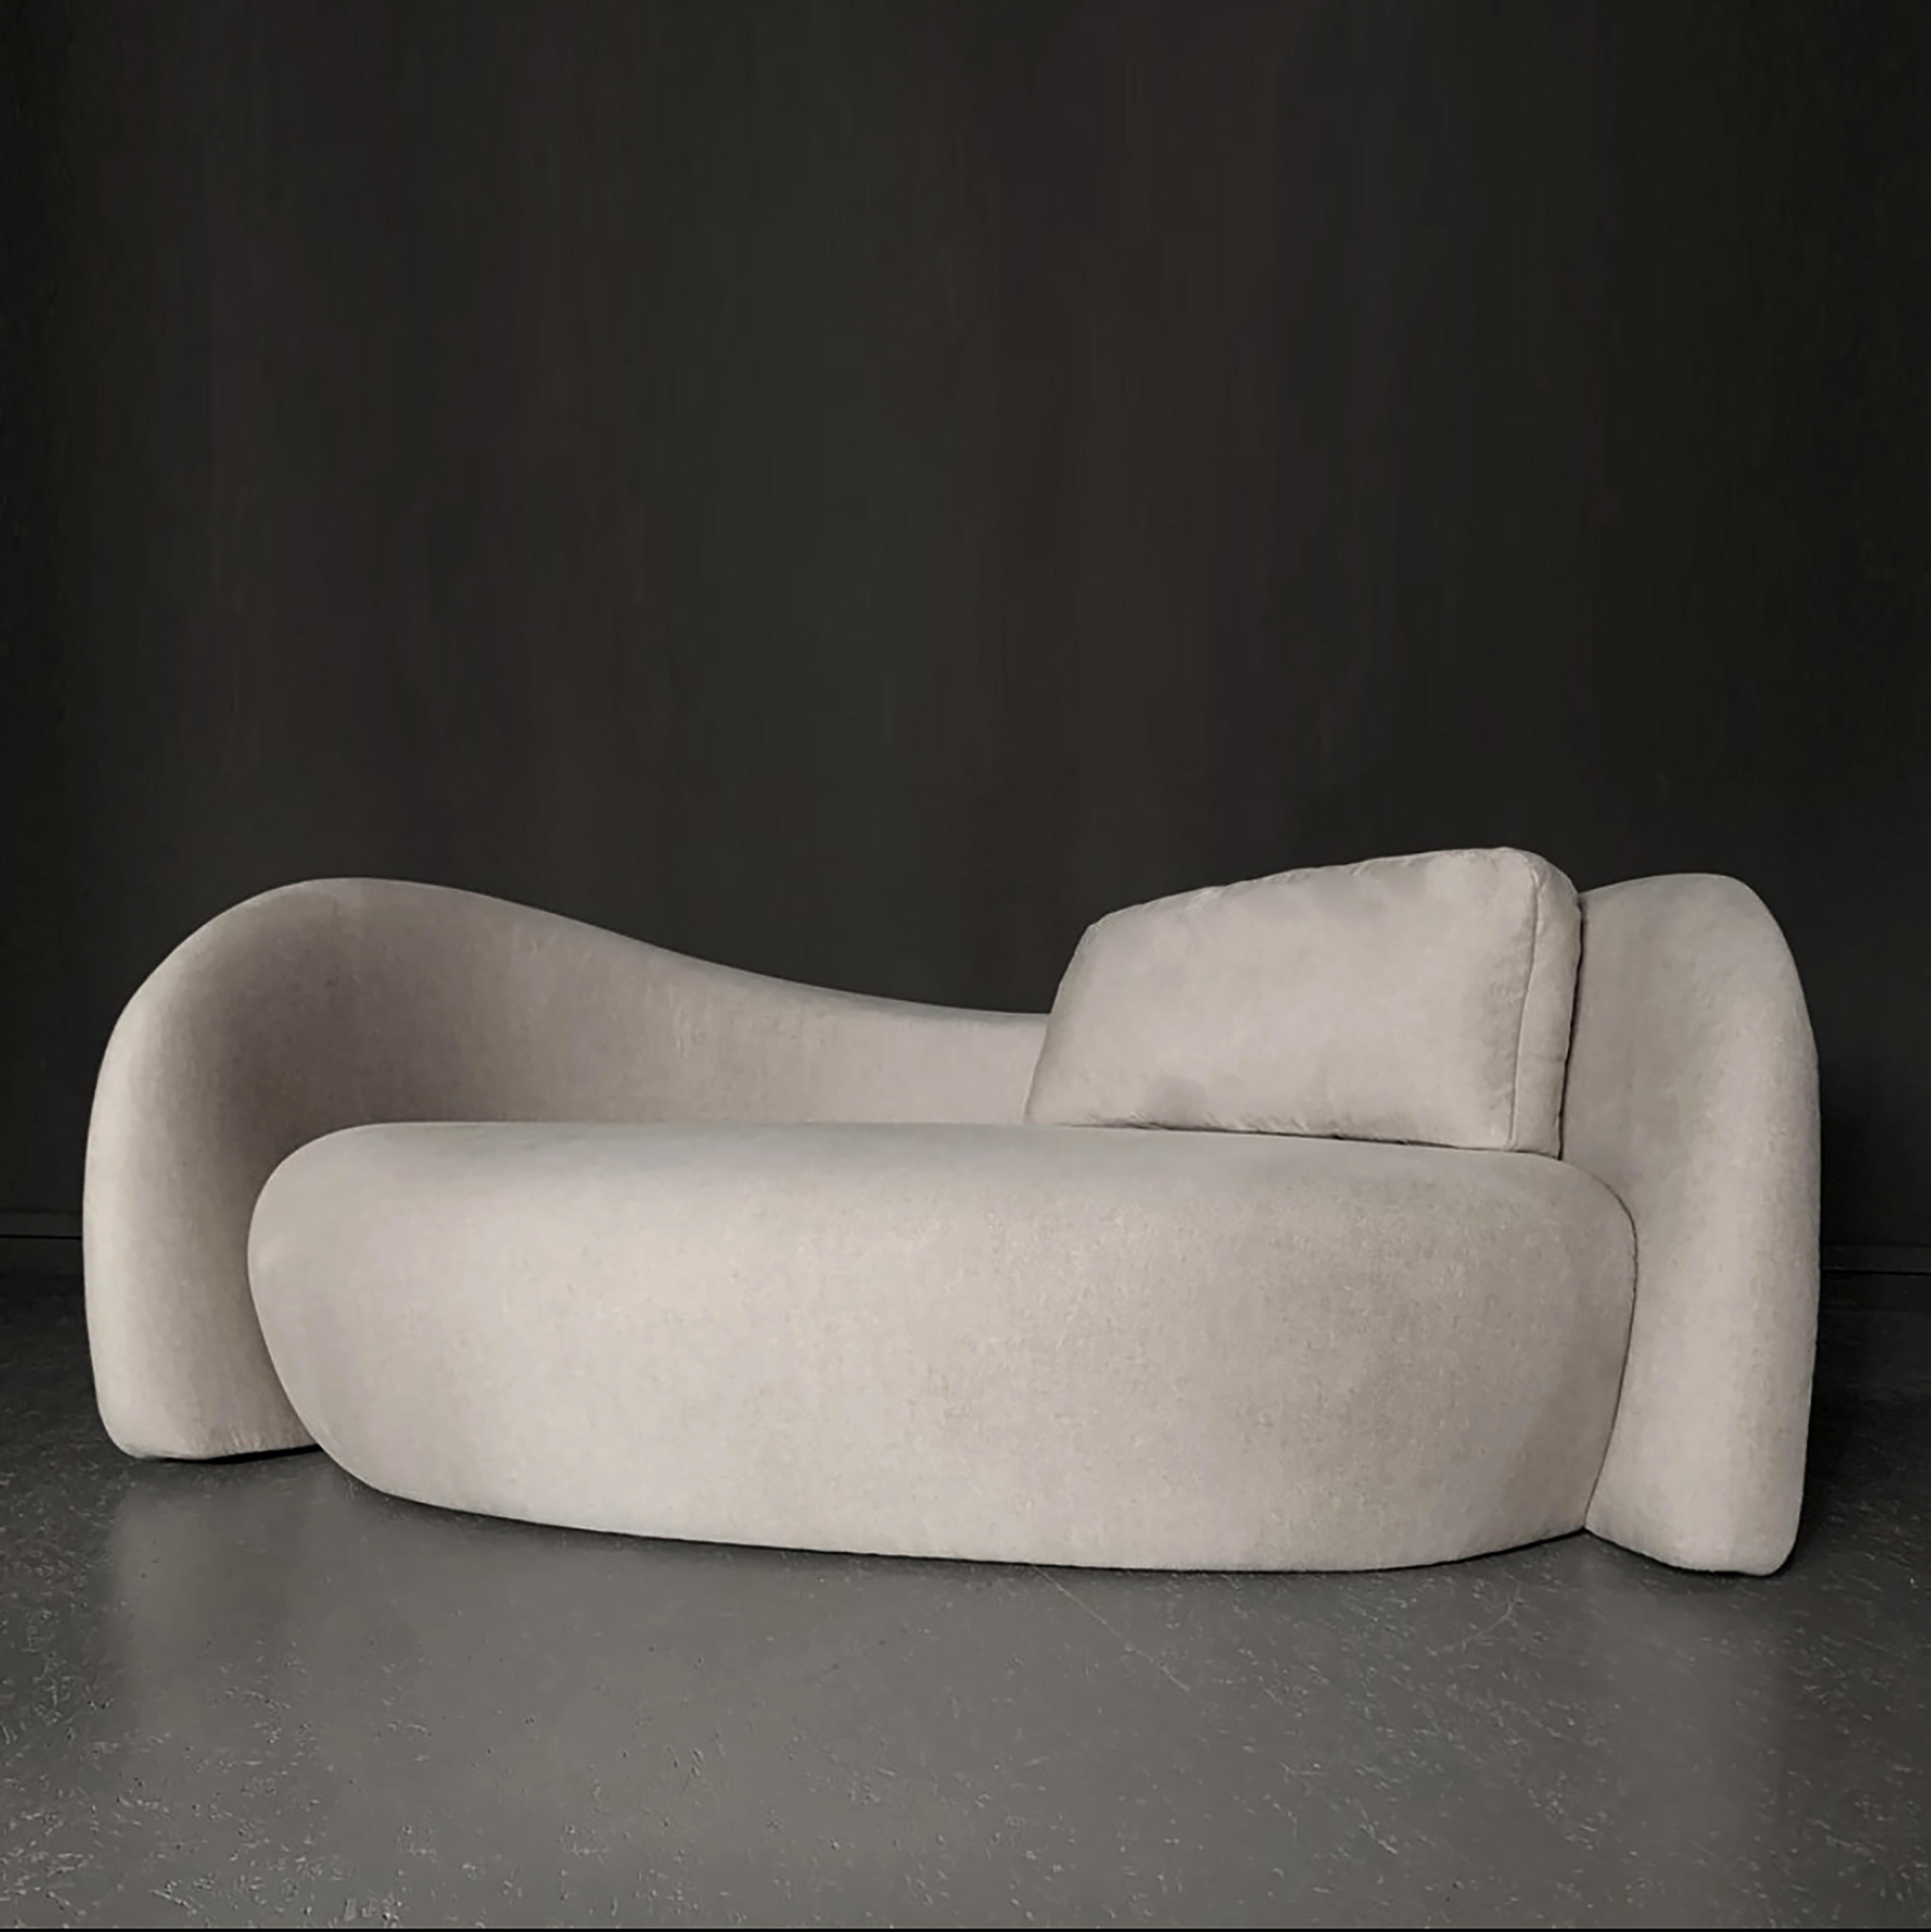 MOON SOFA BY RAPHAEL NAVOT HAND CRAFTED AND PUBLISHED BY DOMEAU PERES EDITIONS FOR ATELIERS COURBET